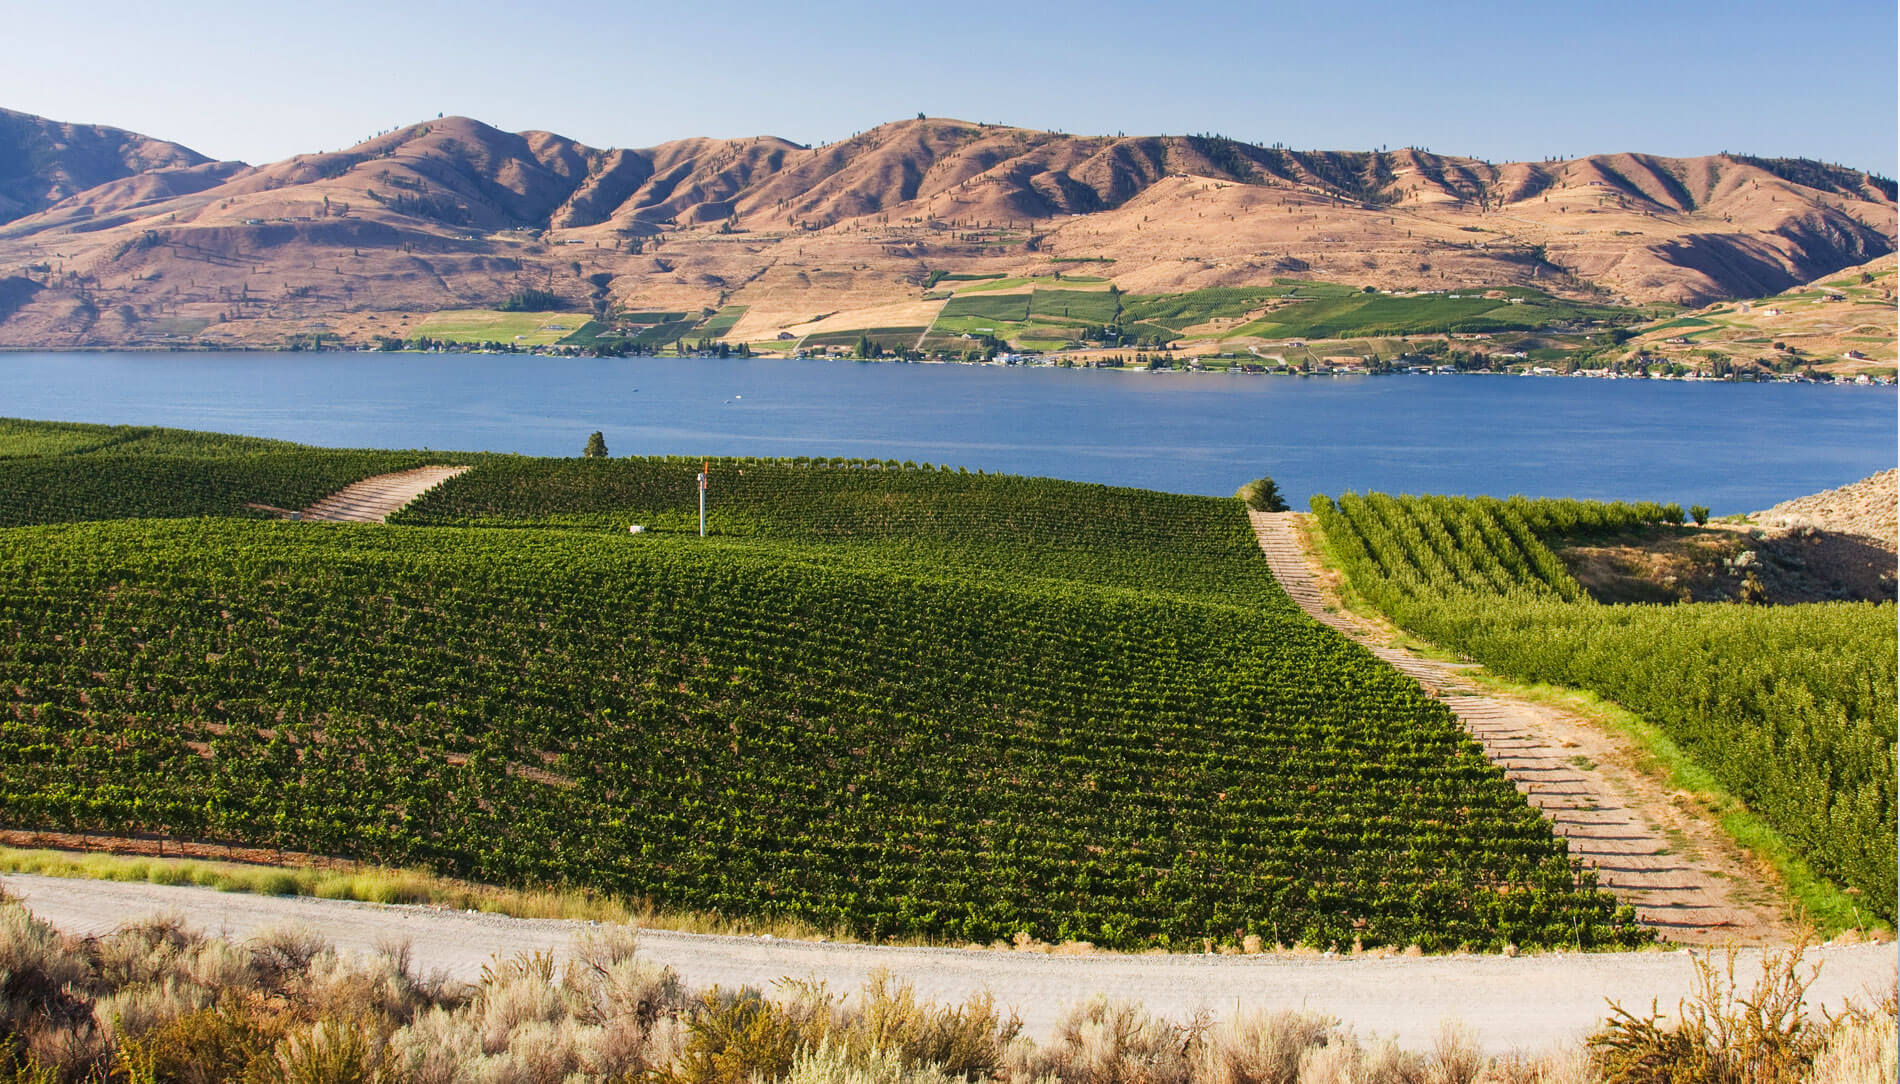 Green vineyards and the blue waters of Lake Chelan with mountains beyond